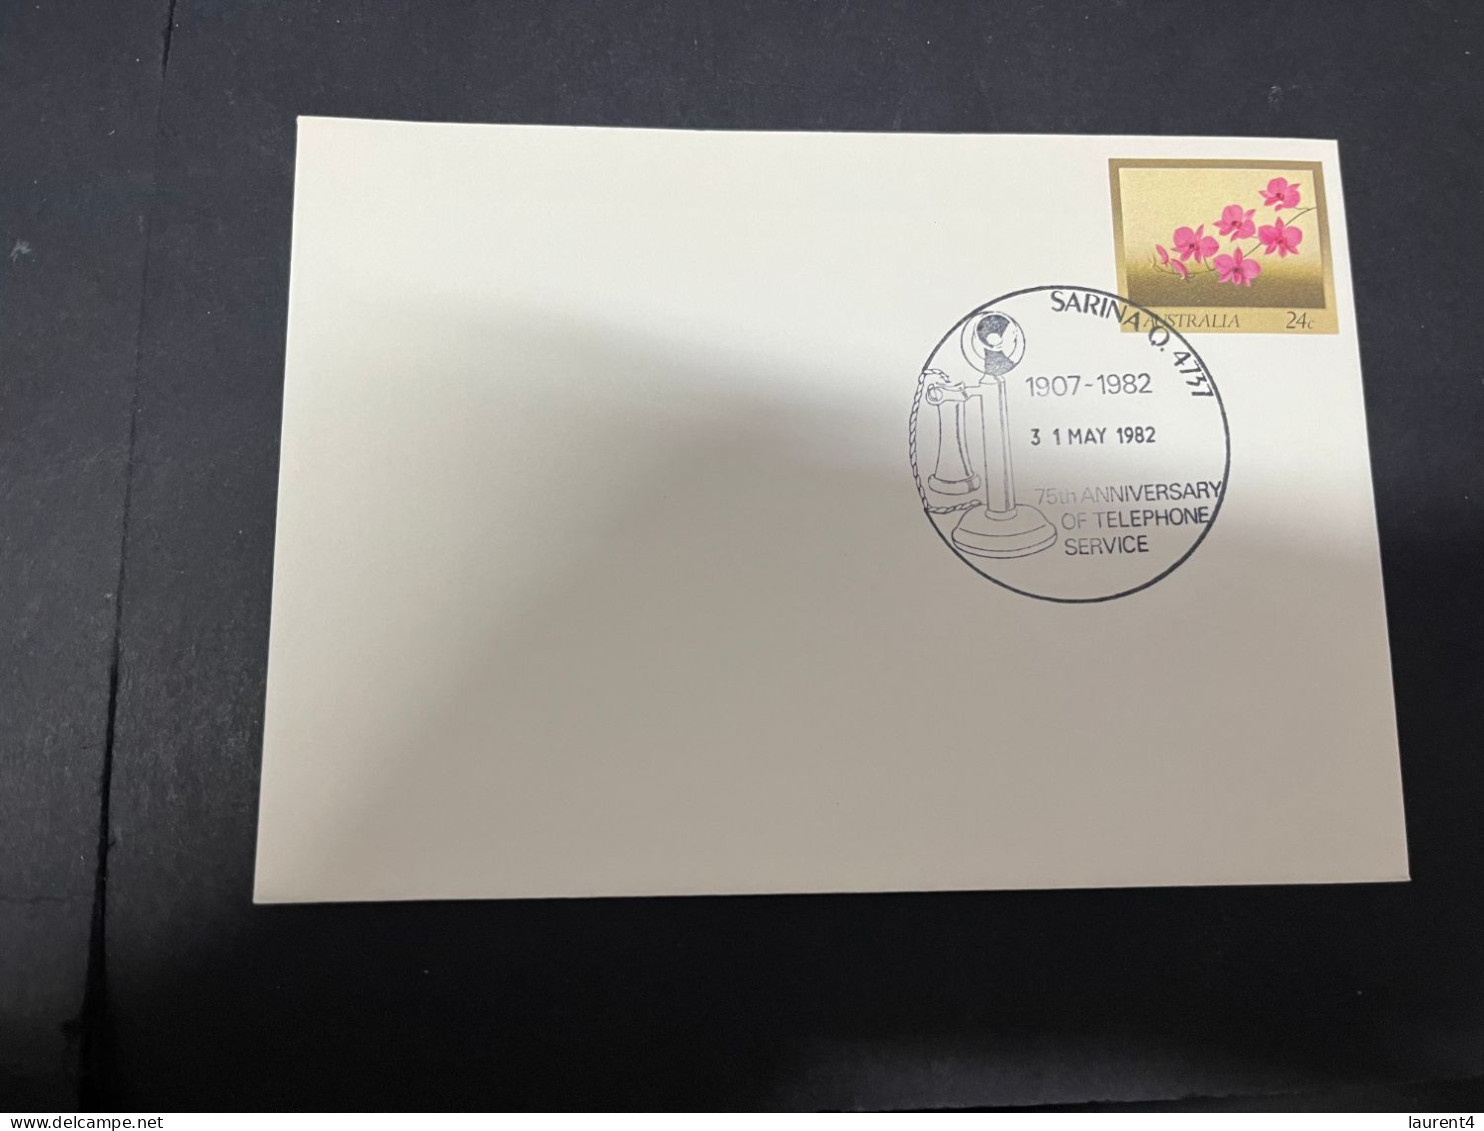 26-4-2024 (3 Z 9) Australia FDC - 1982 - 75th Anniversary Of Telephone Service (special P/m) - Premiers Jours (FDC)